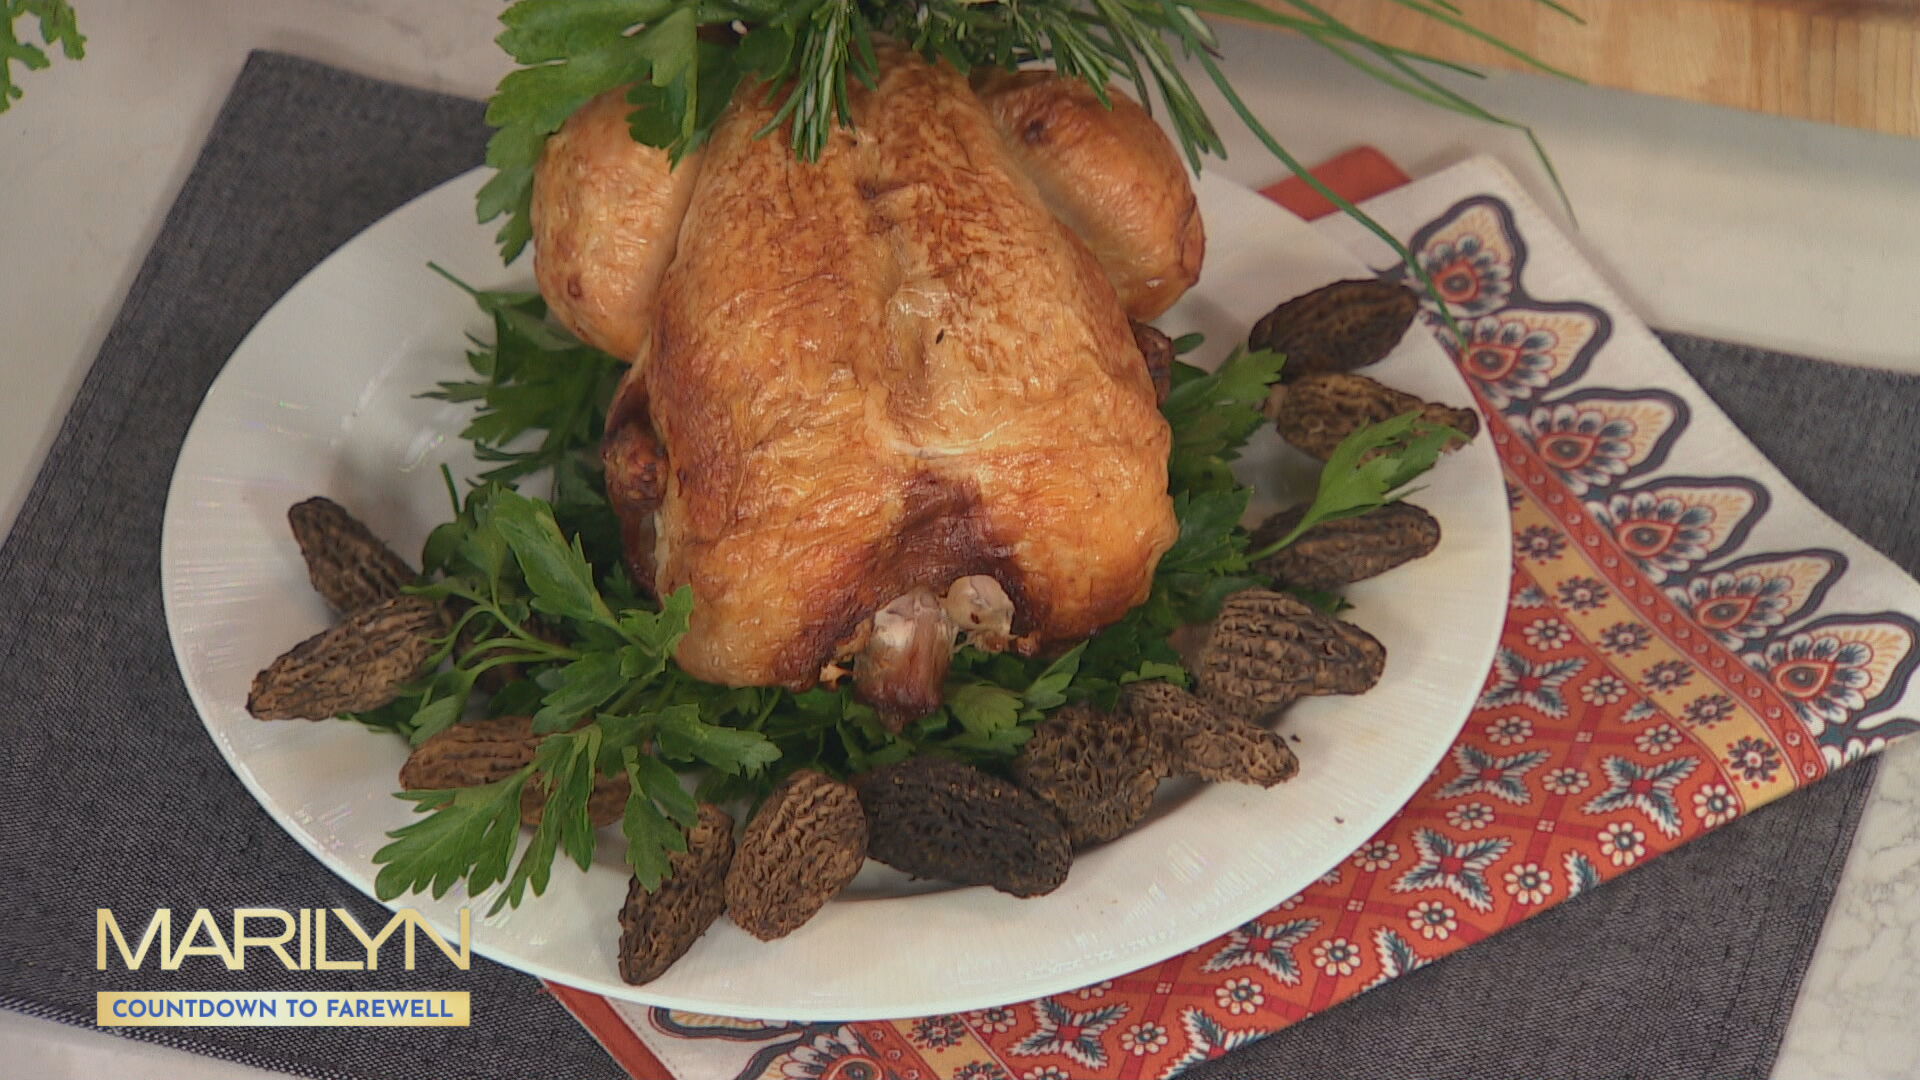 Daniel Boulud’s ultimate roasted chicken with morels à la crème and white asparagus